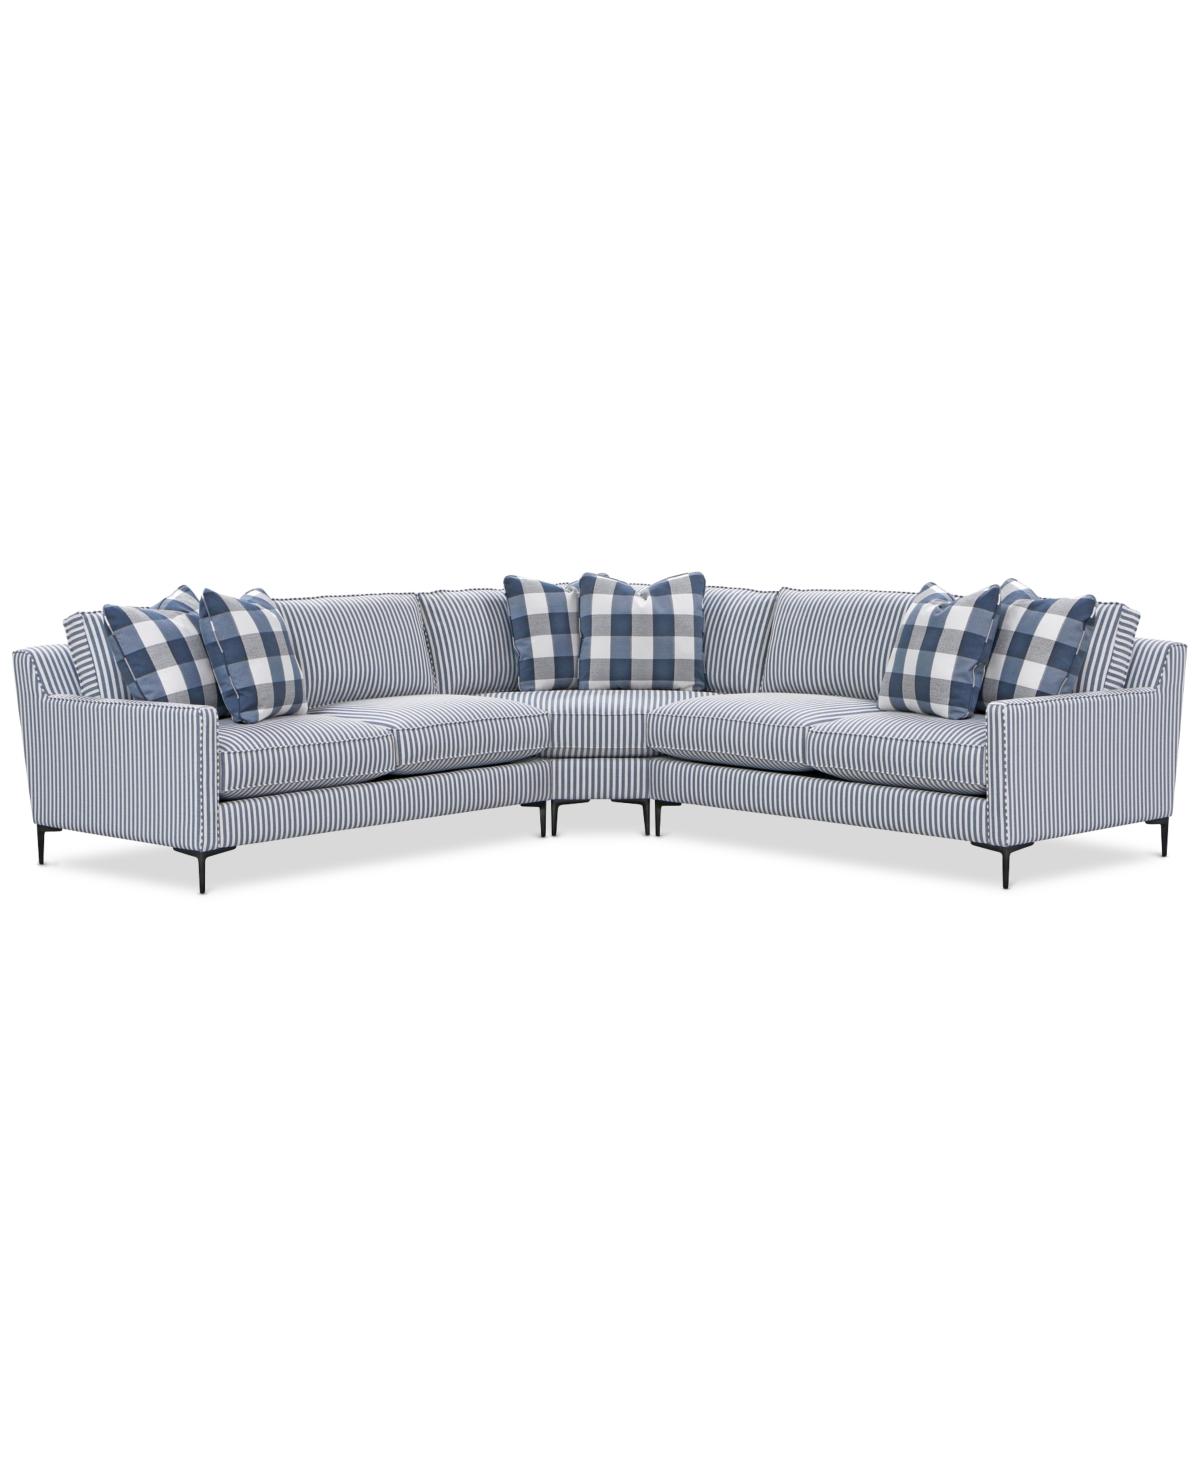 Furniture Closeout! Laylanna 119" 3-pc. Fabric Striped L-shape Sectional, Created For Macy's In Blue